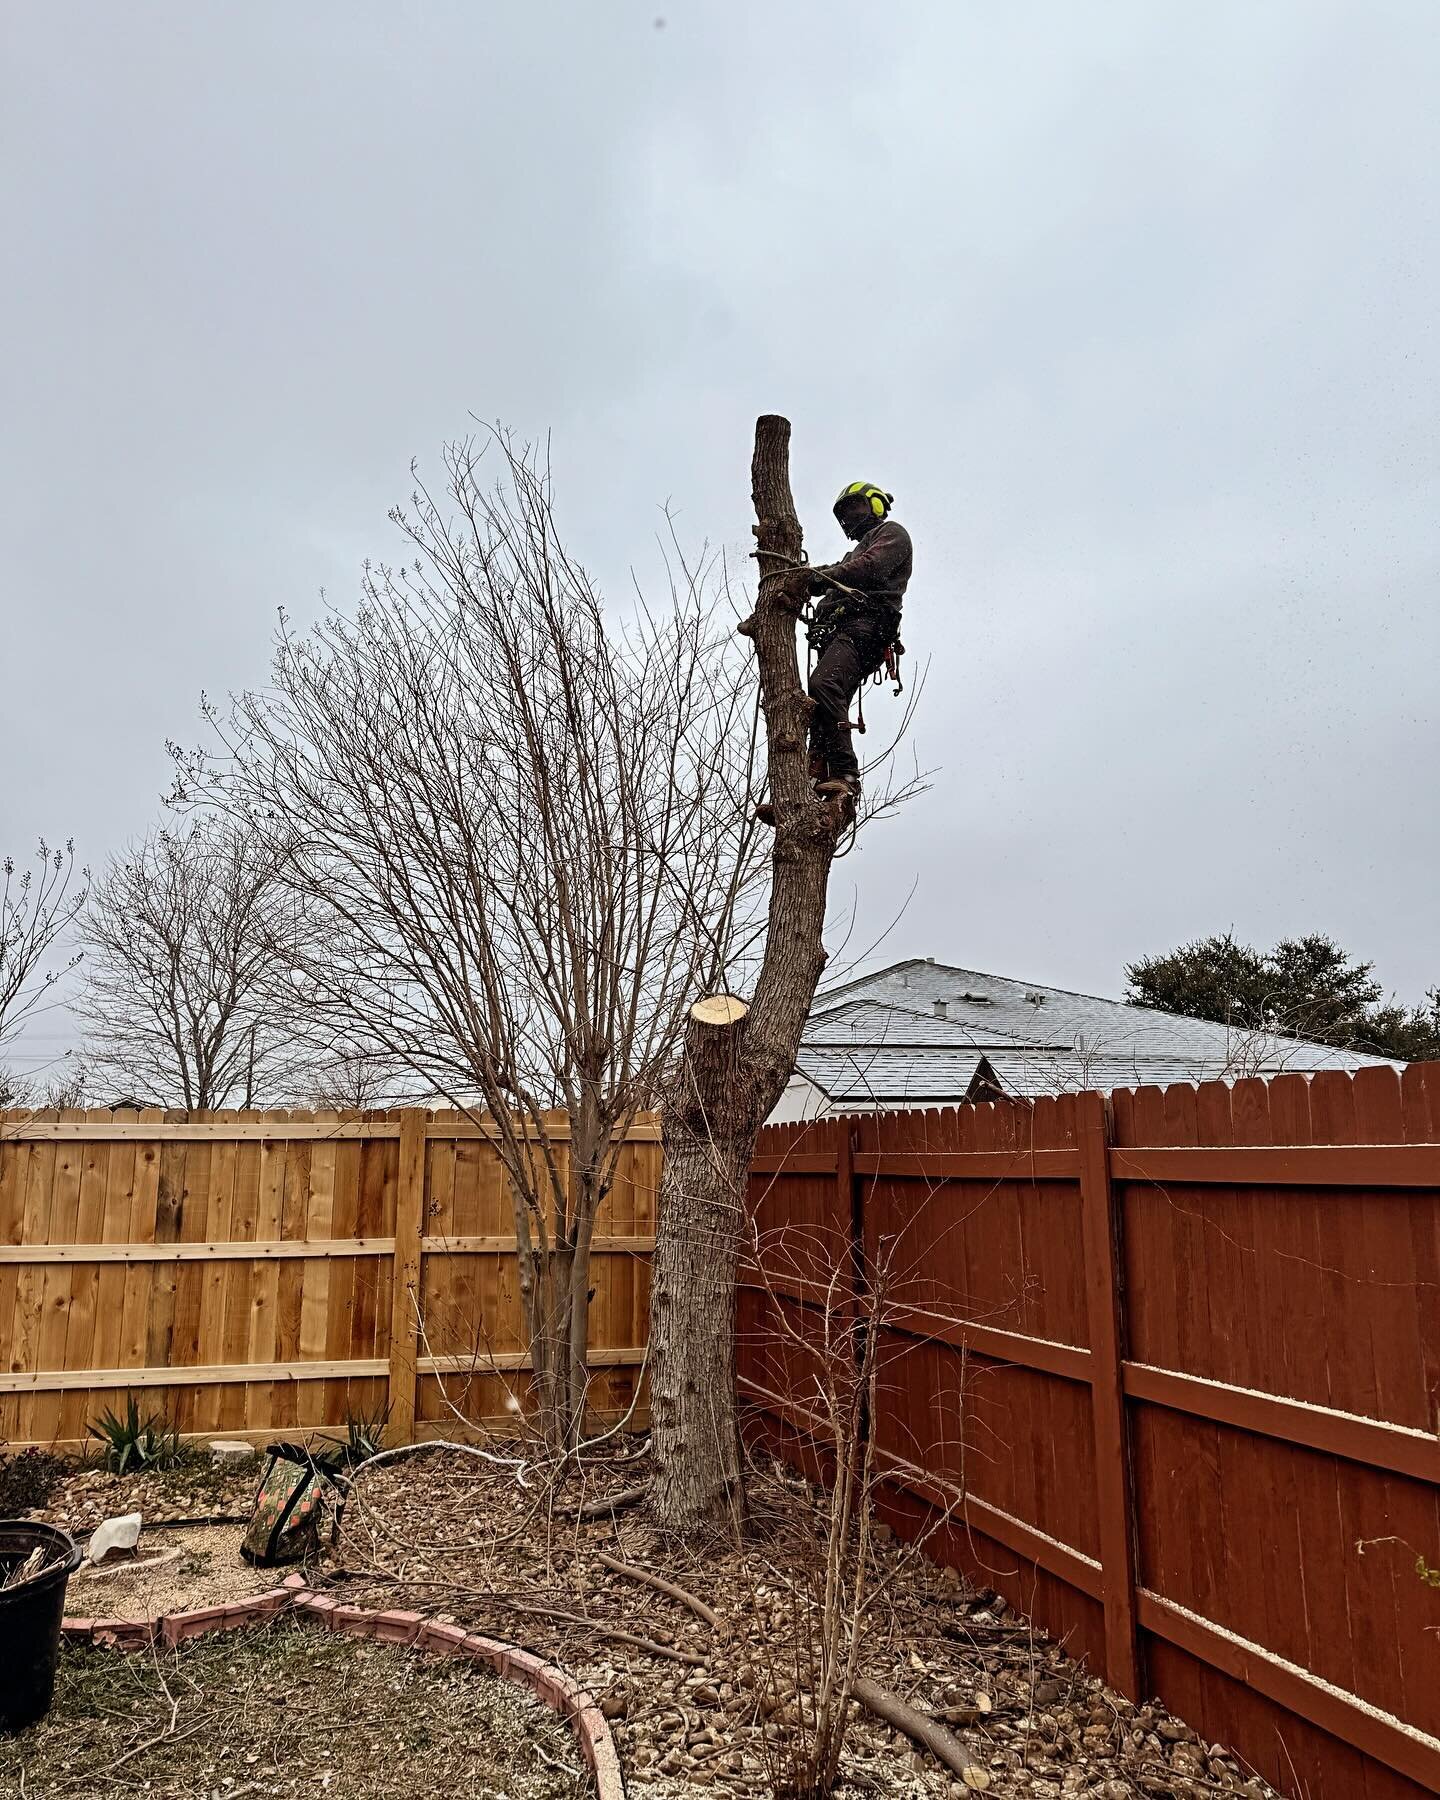 Knocked out a frosty, sketchy removal this morning.
Stay warm Texas!

#treeremovalservice #treeservicecompany #treeremovals #treeworklife #treework #treeclimbing #treeclimber #centraltexas #centraltx #georgetowntx